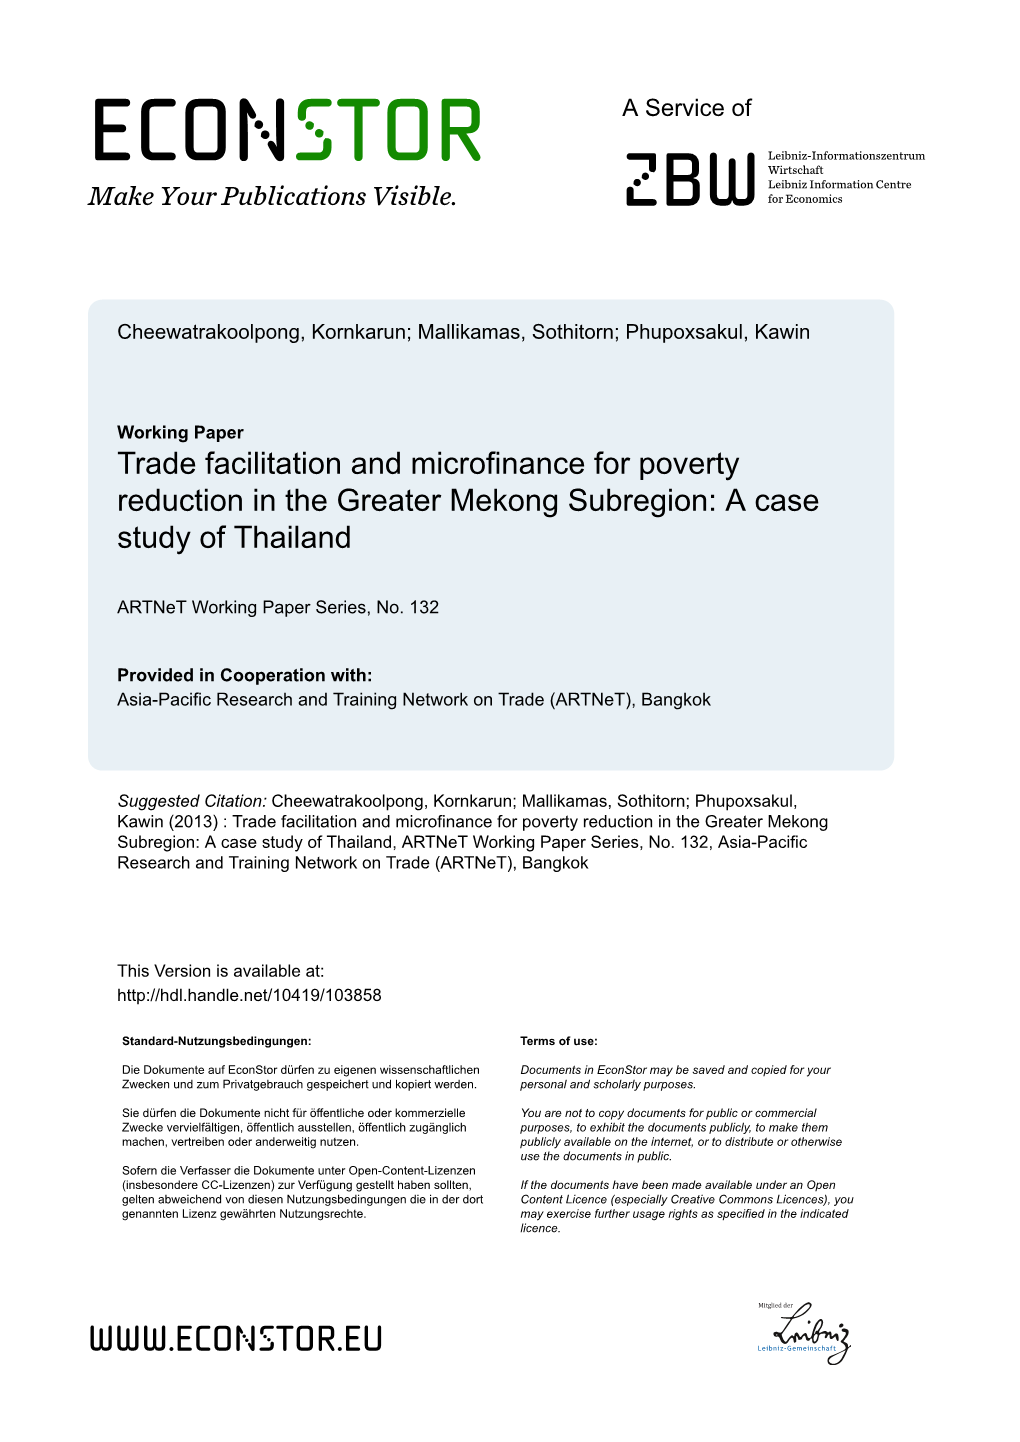 Trade Facilitation and Microfinance for Poverty Reduction in the Greater Mekong Subregion: a Case Study of Thailand